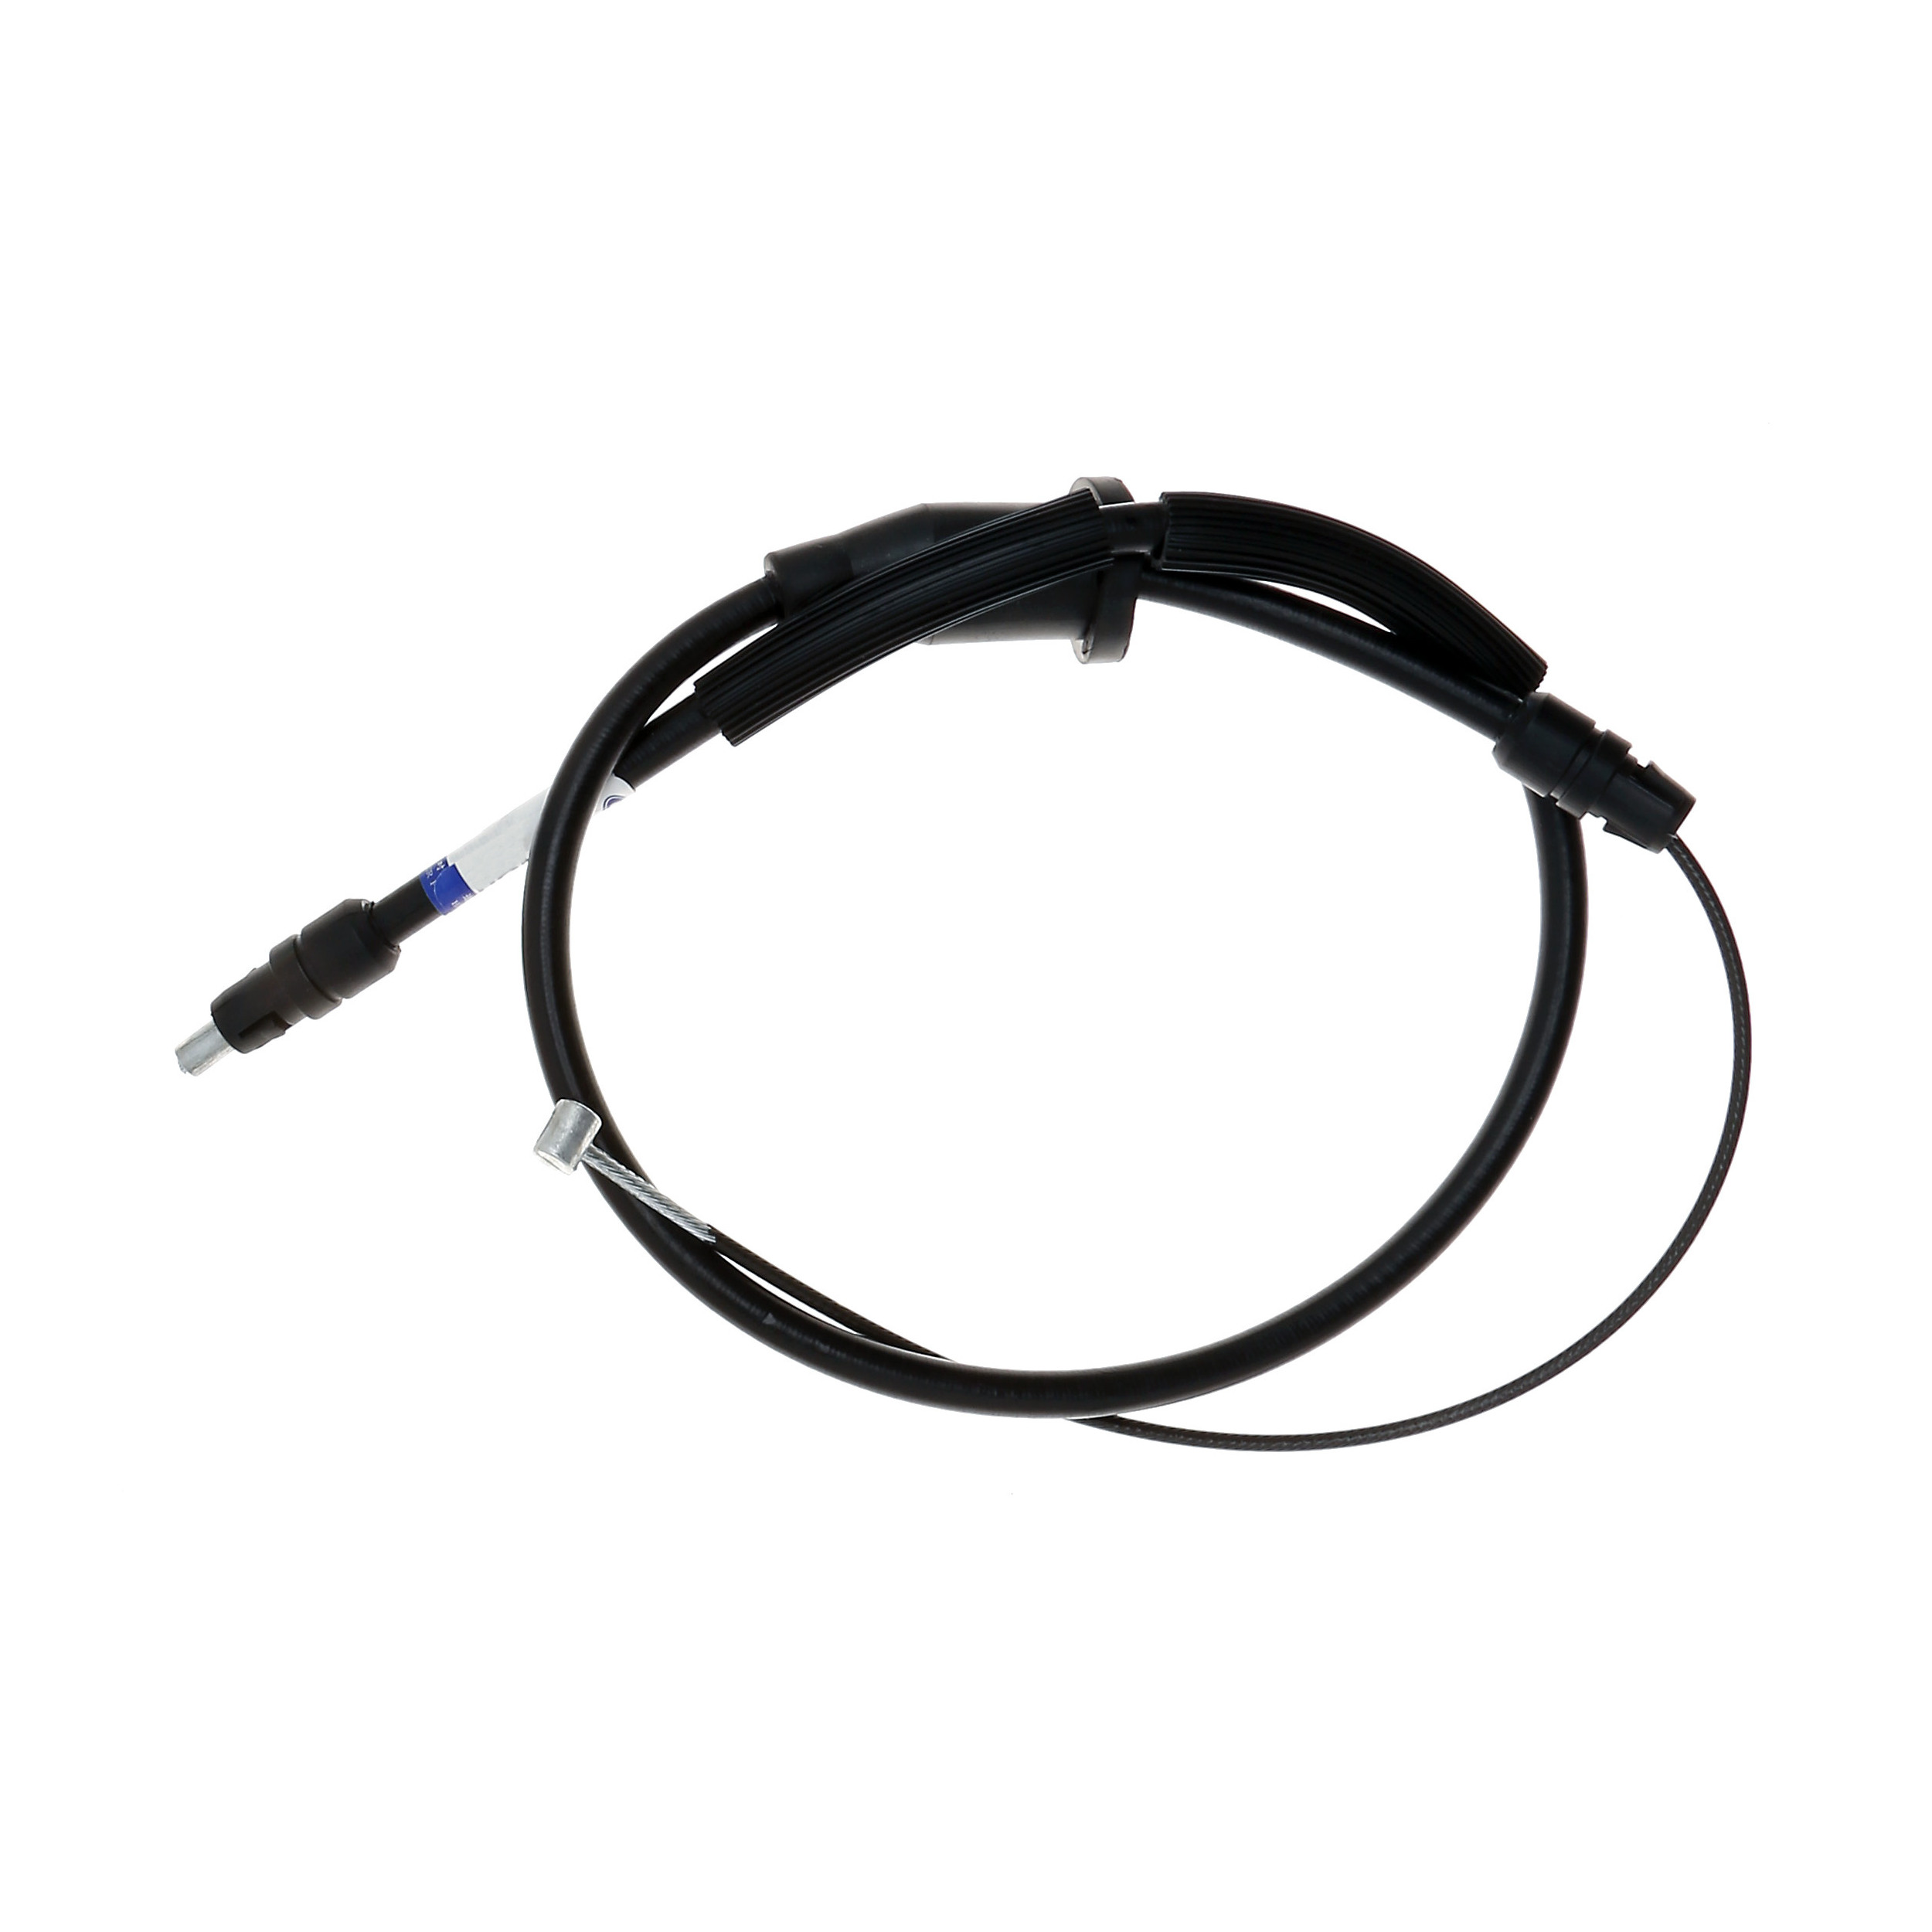 Raybestos Element3 Parking Brake Cable, BC97279 - image 1 of 2